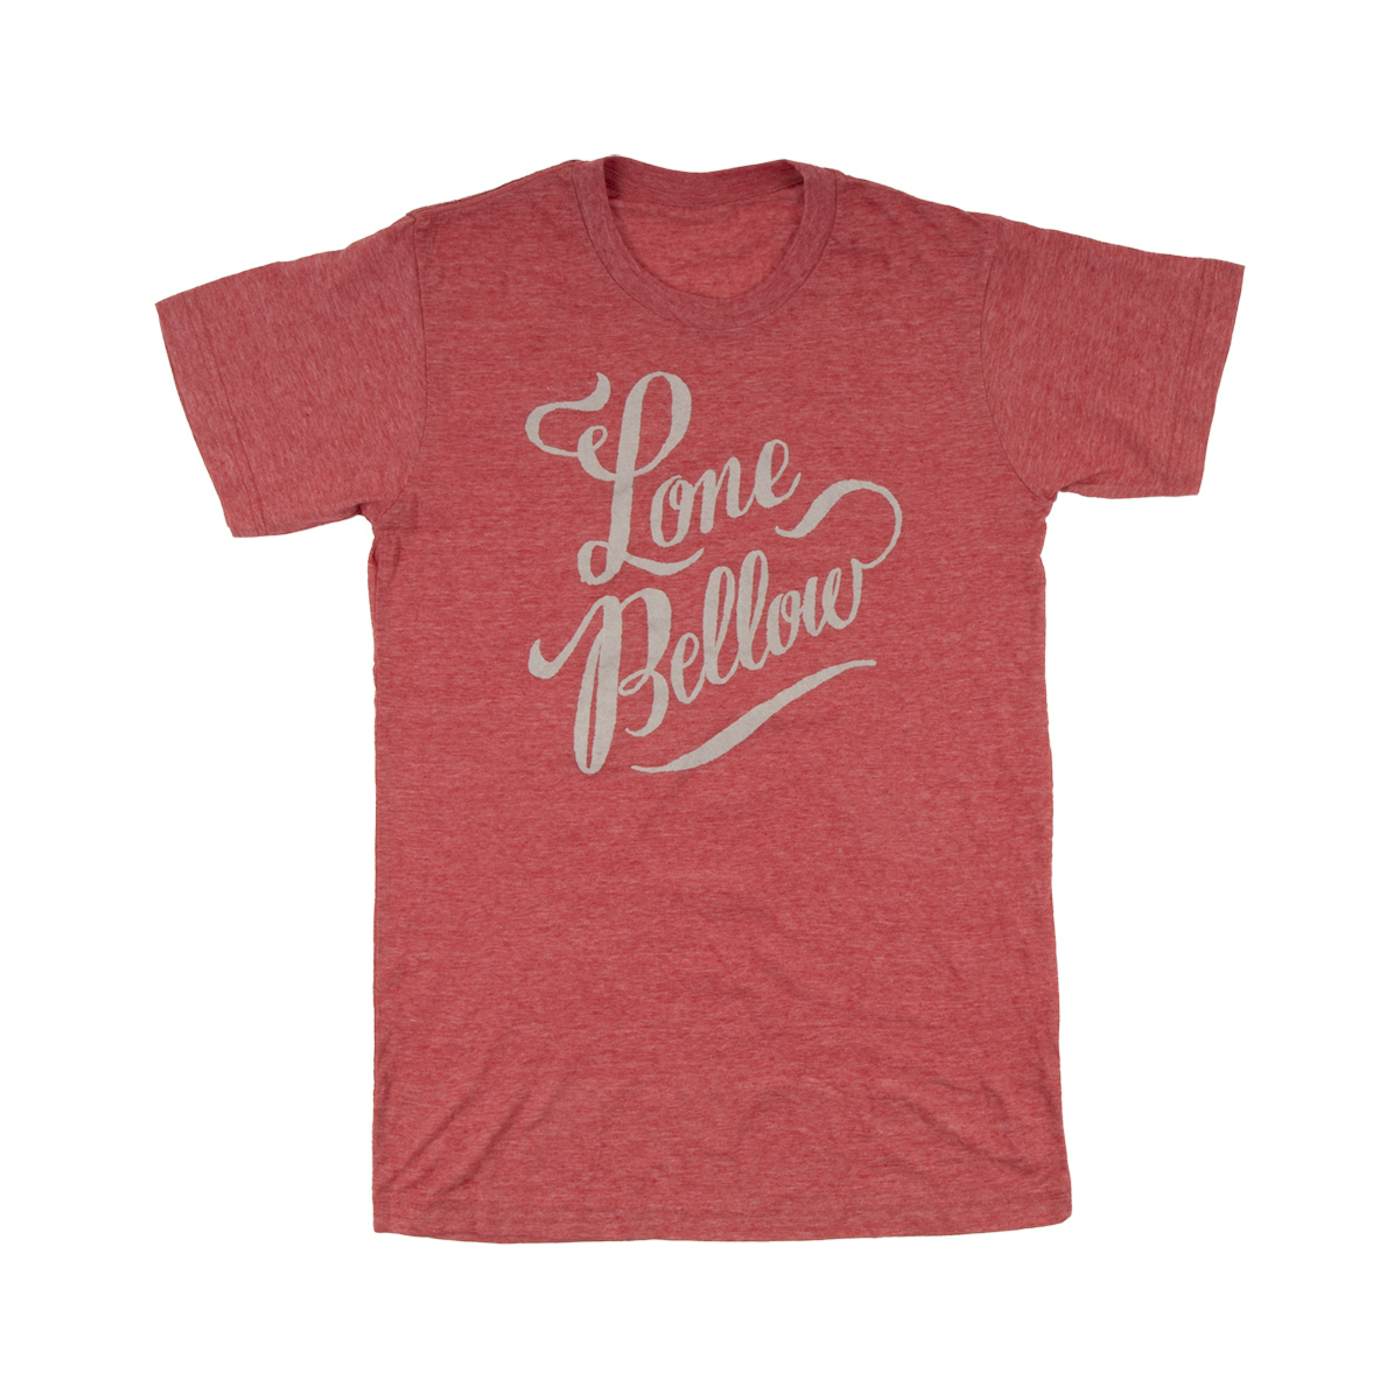 The Lone Bellow Heather Red Logo Tee